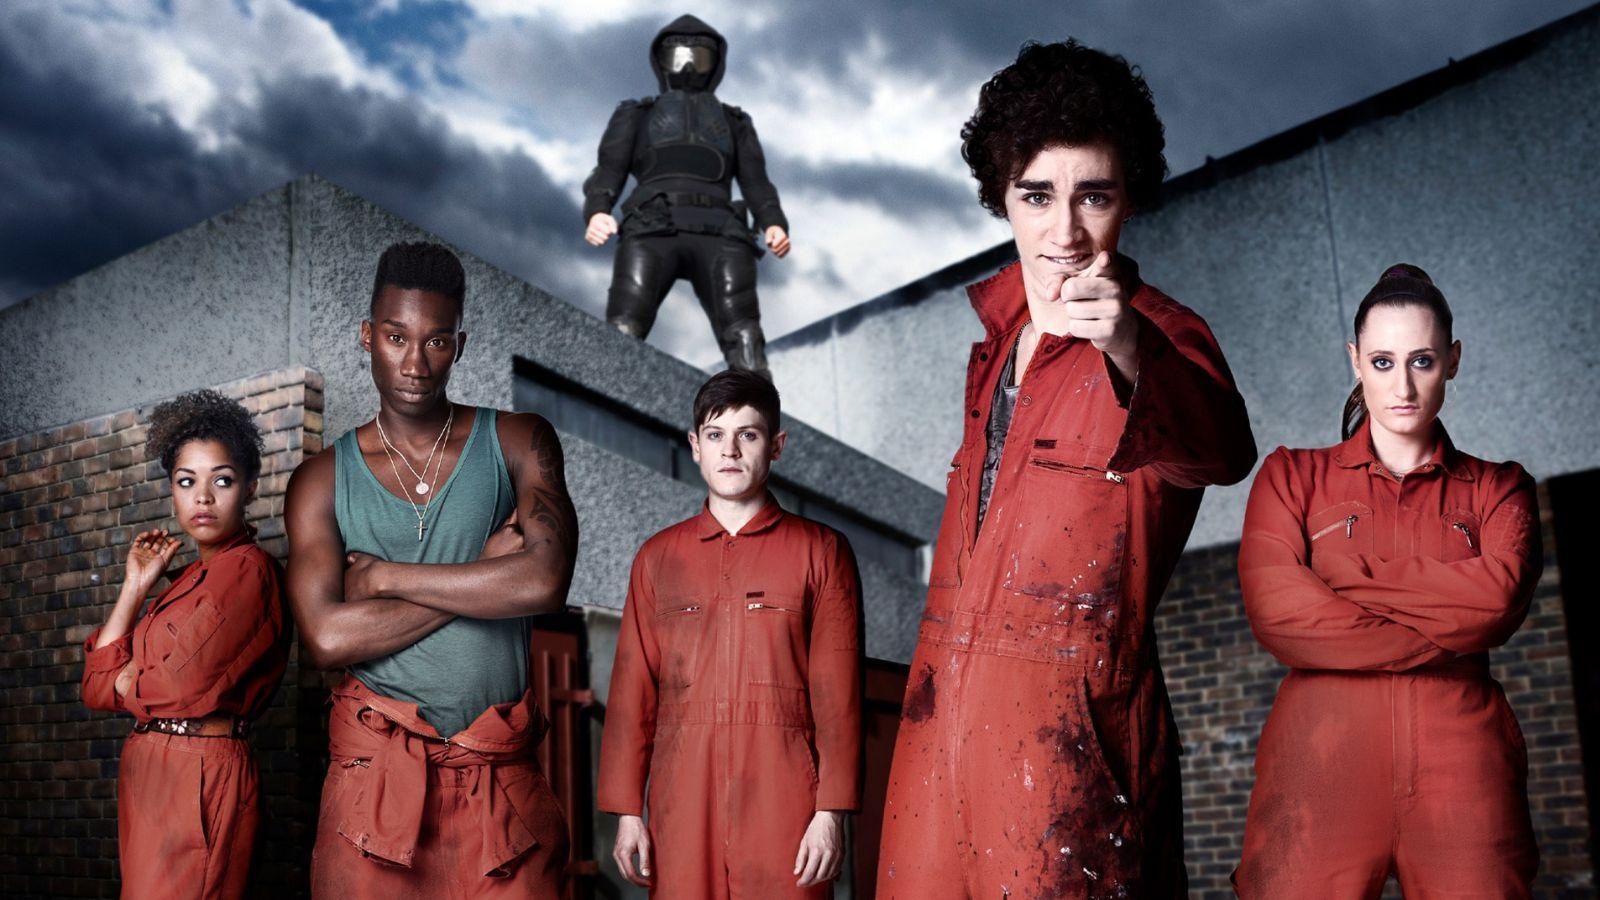 The cast of Misfits